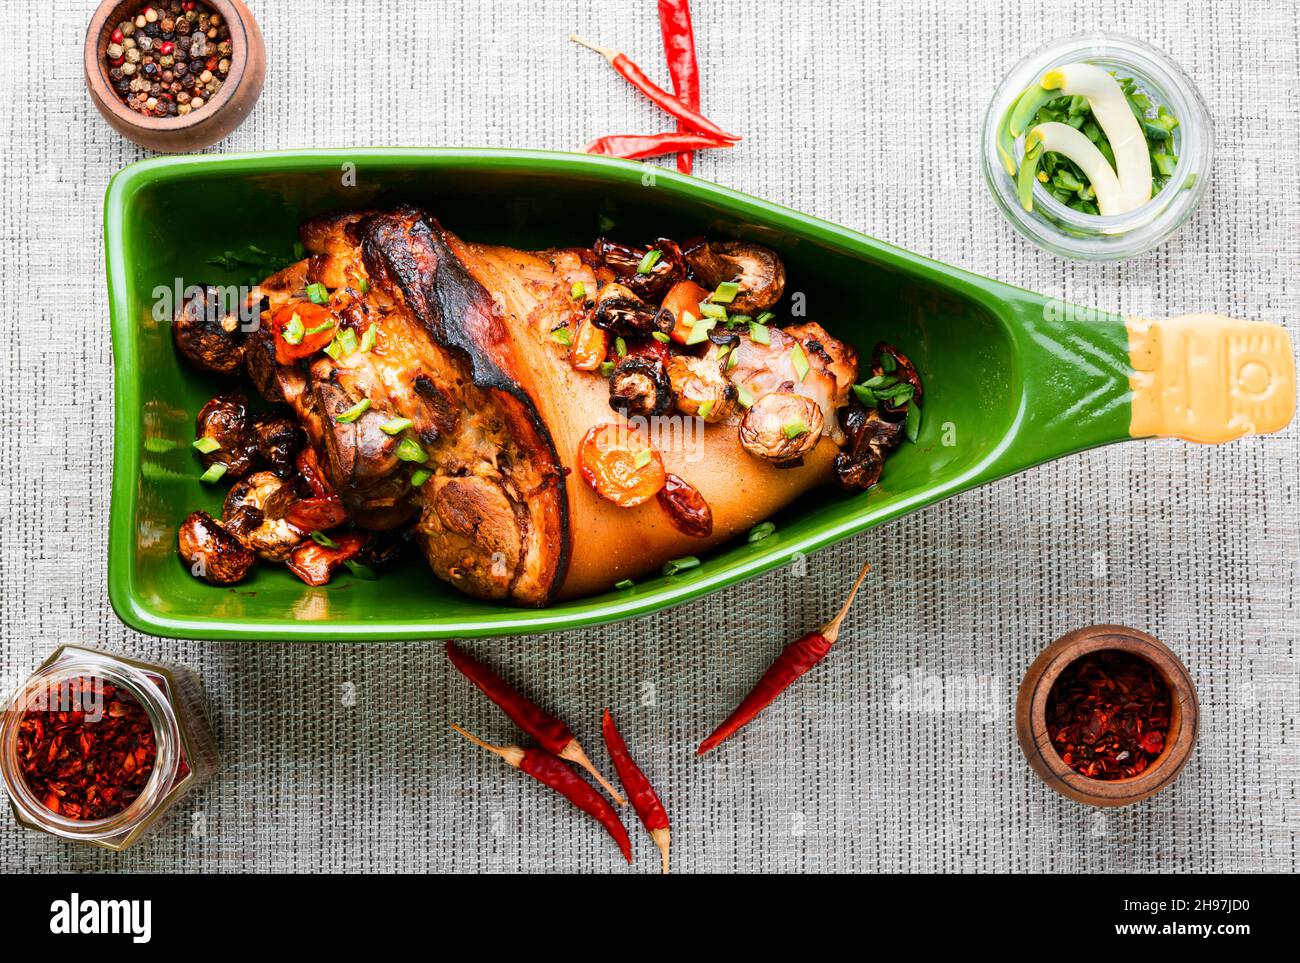 Delicious roast pork knuckle in the baking dish. Pork hock Stock Photo